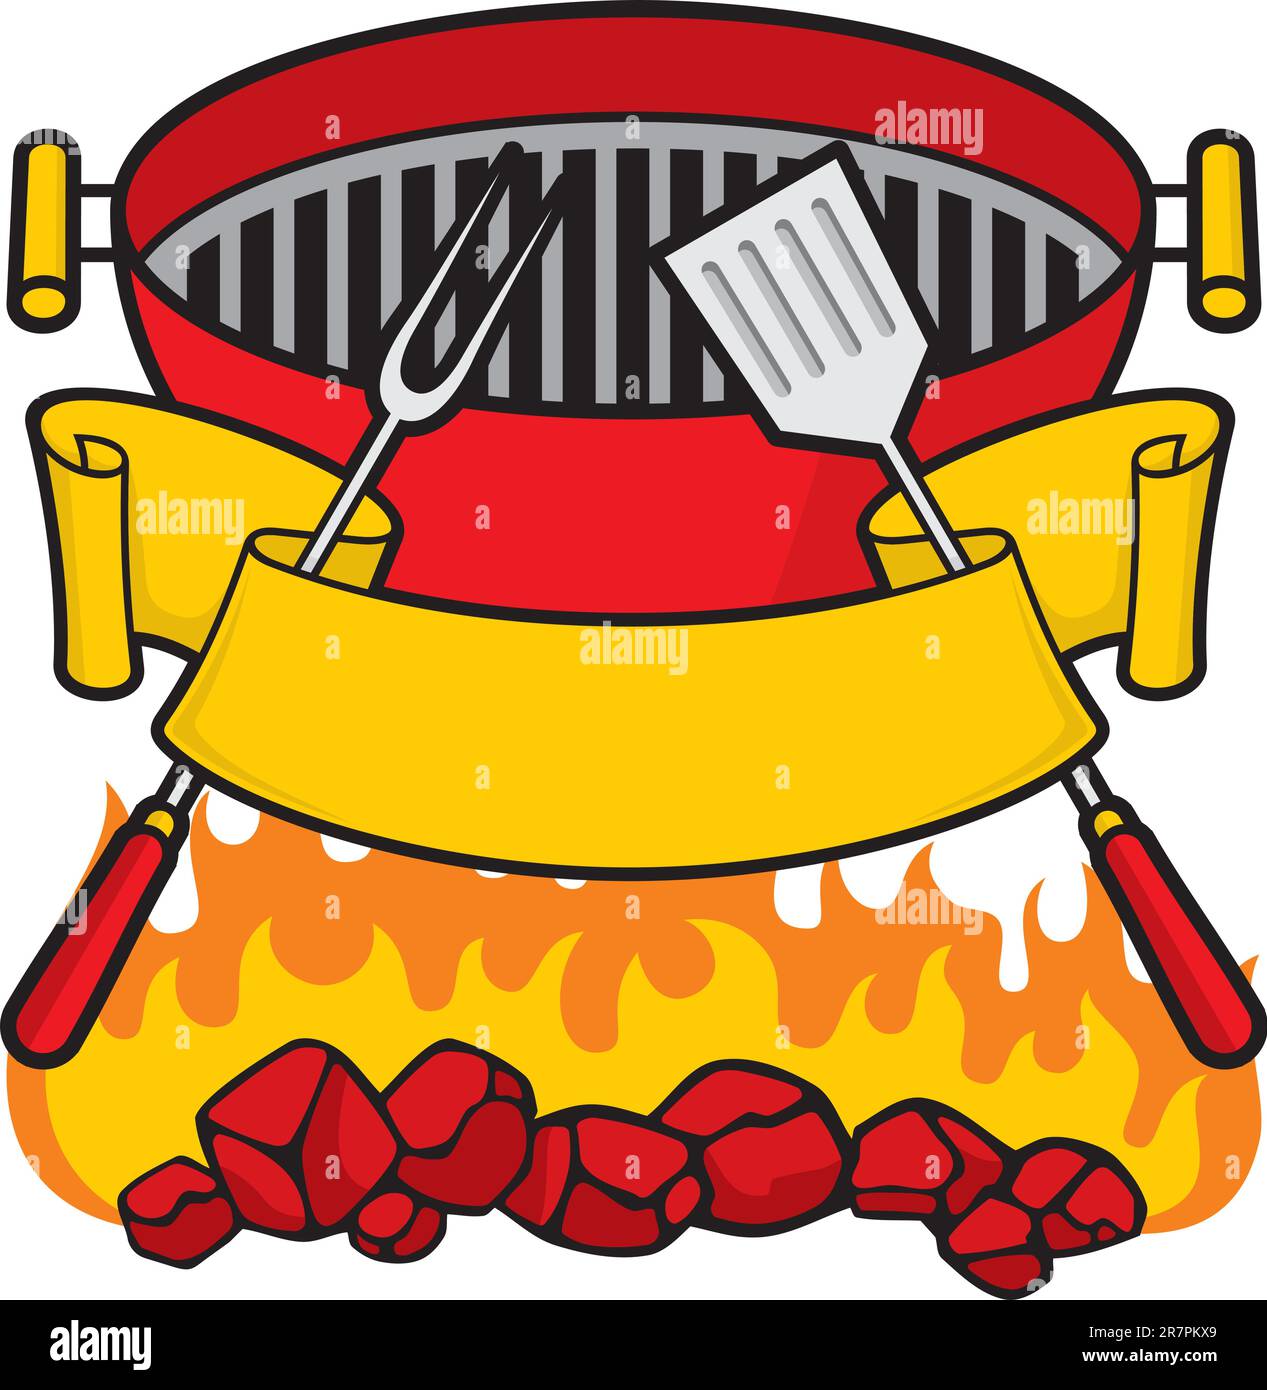 Bbq grille Stock Vector Images - Alamy